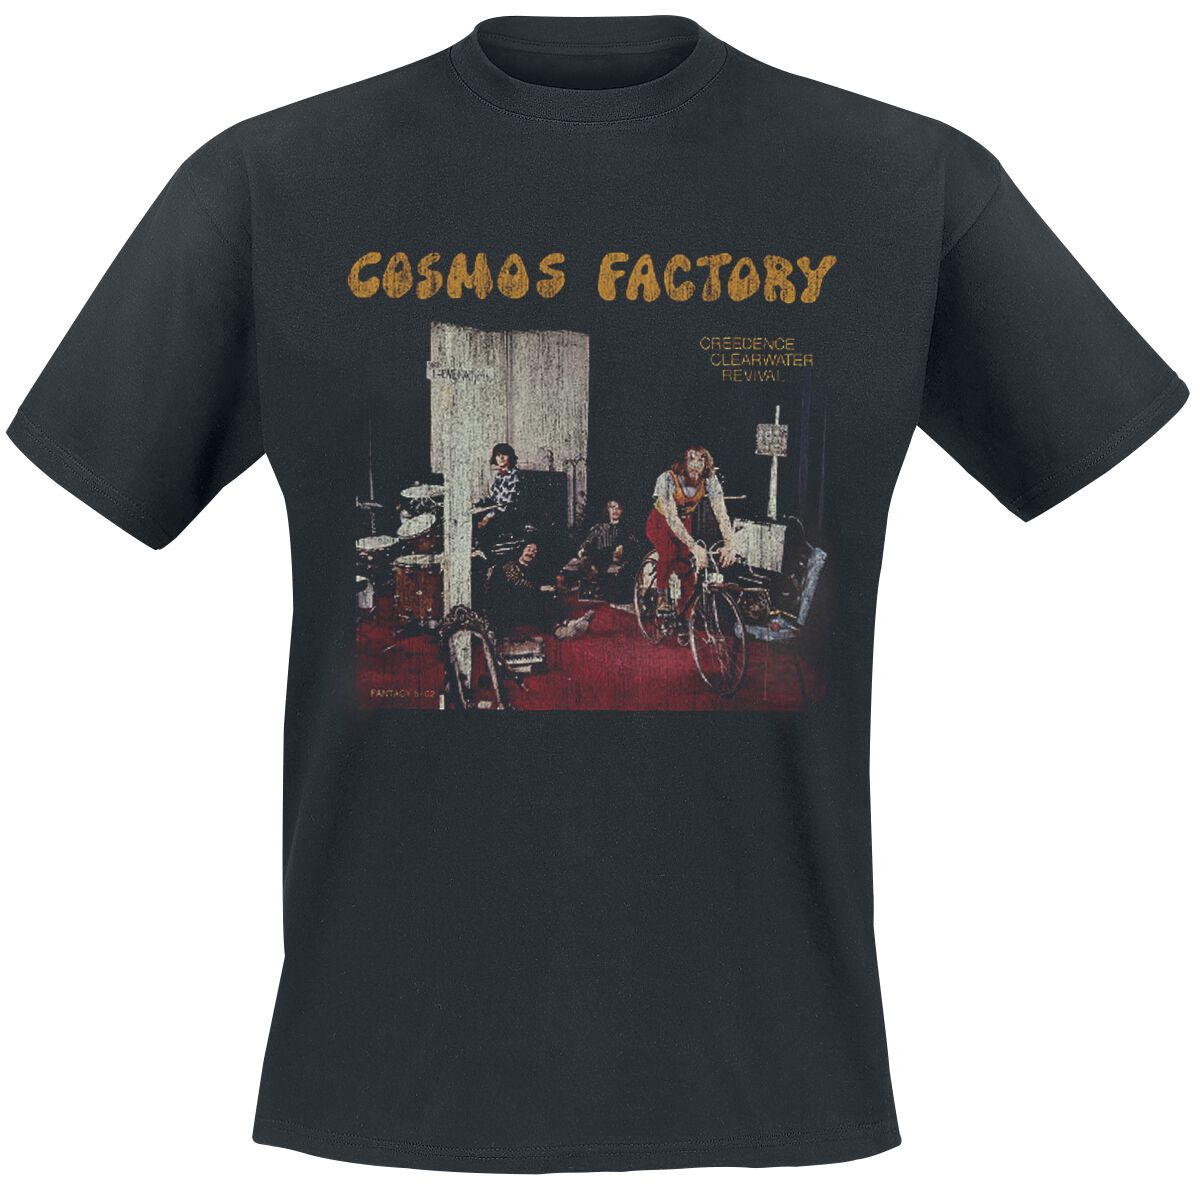 Image of Creedence Clearwater Revival (CCR) Cosmos Factory T-Shirt schwarz